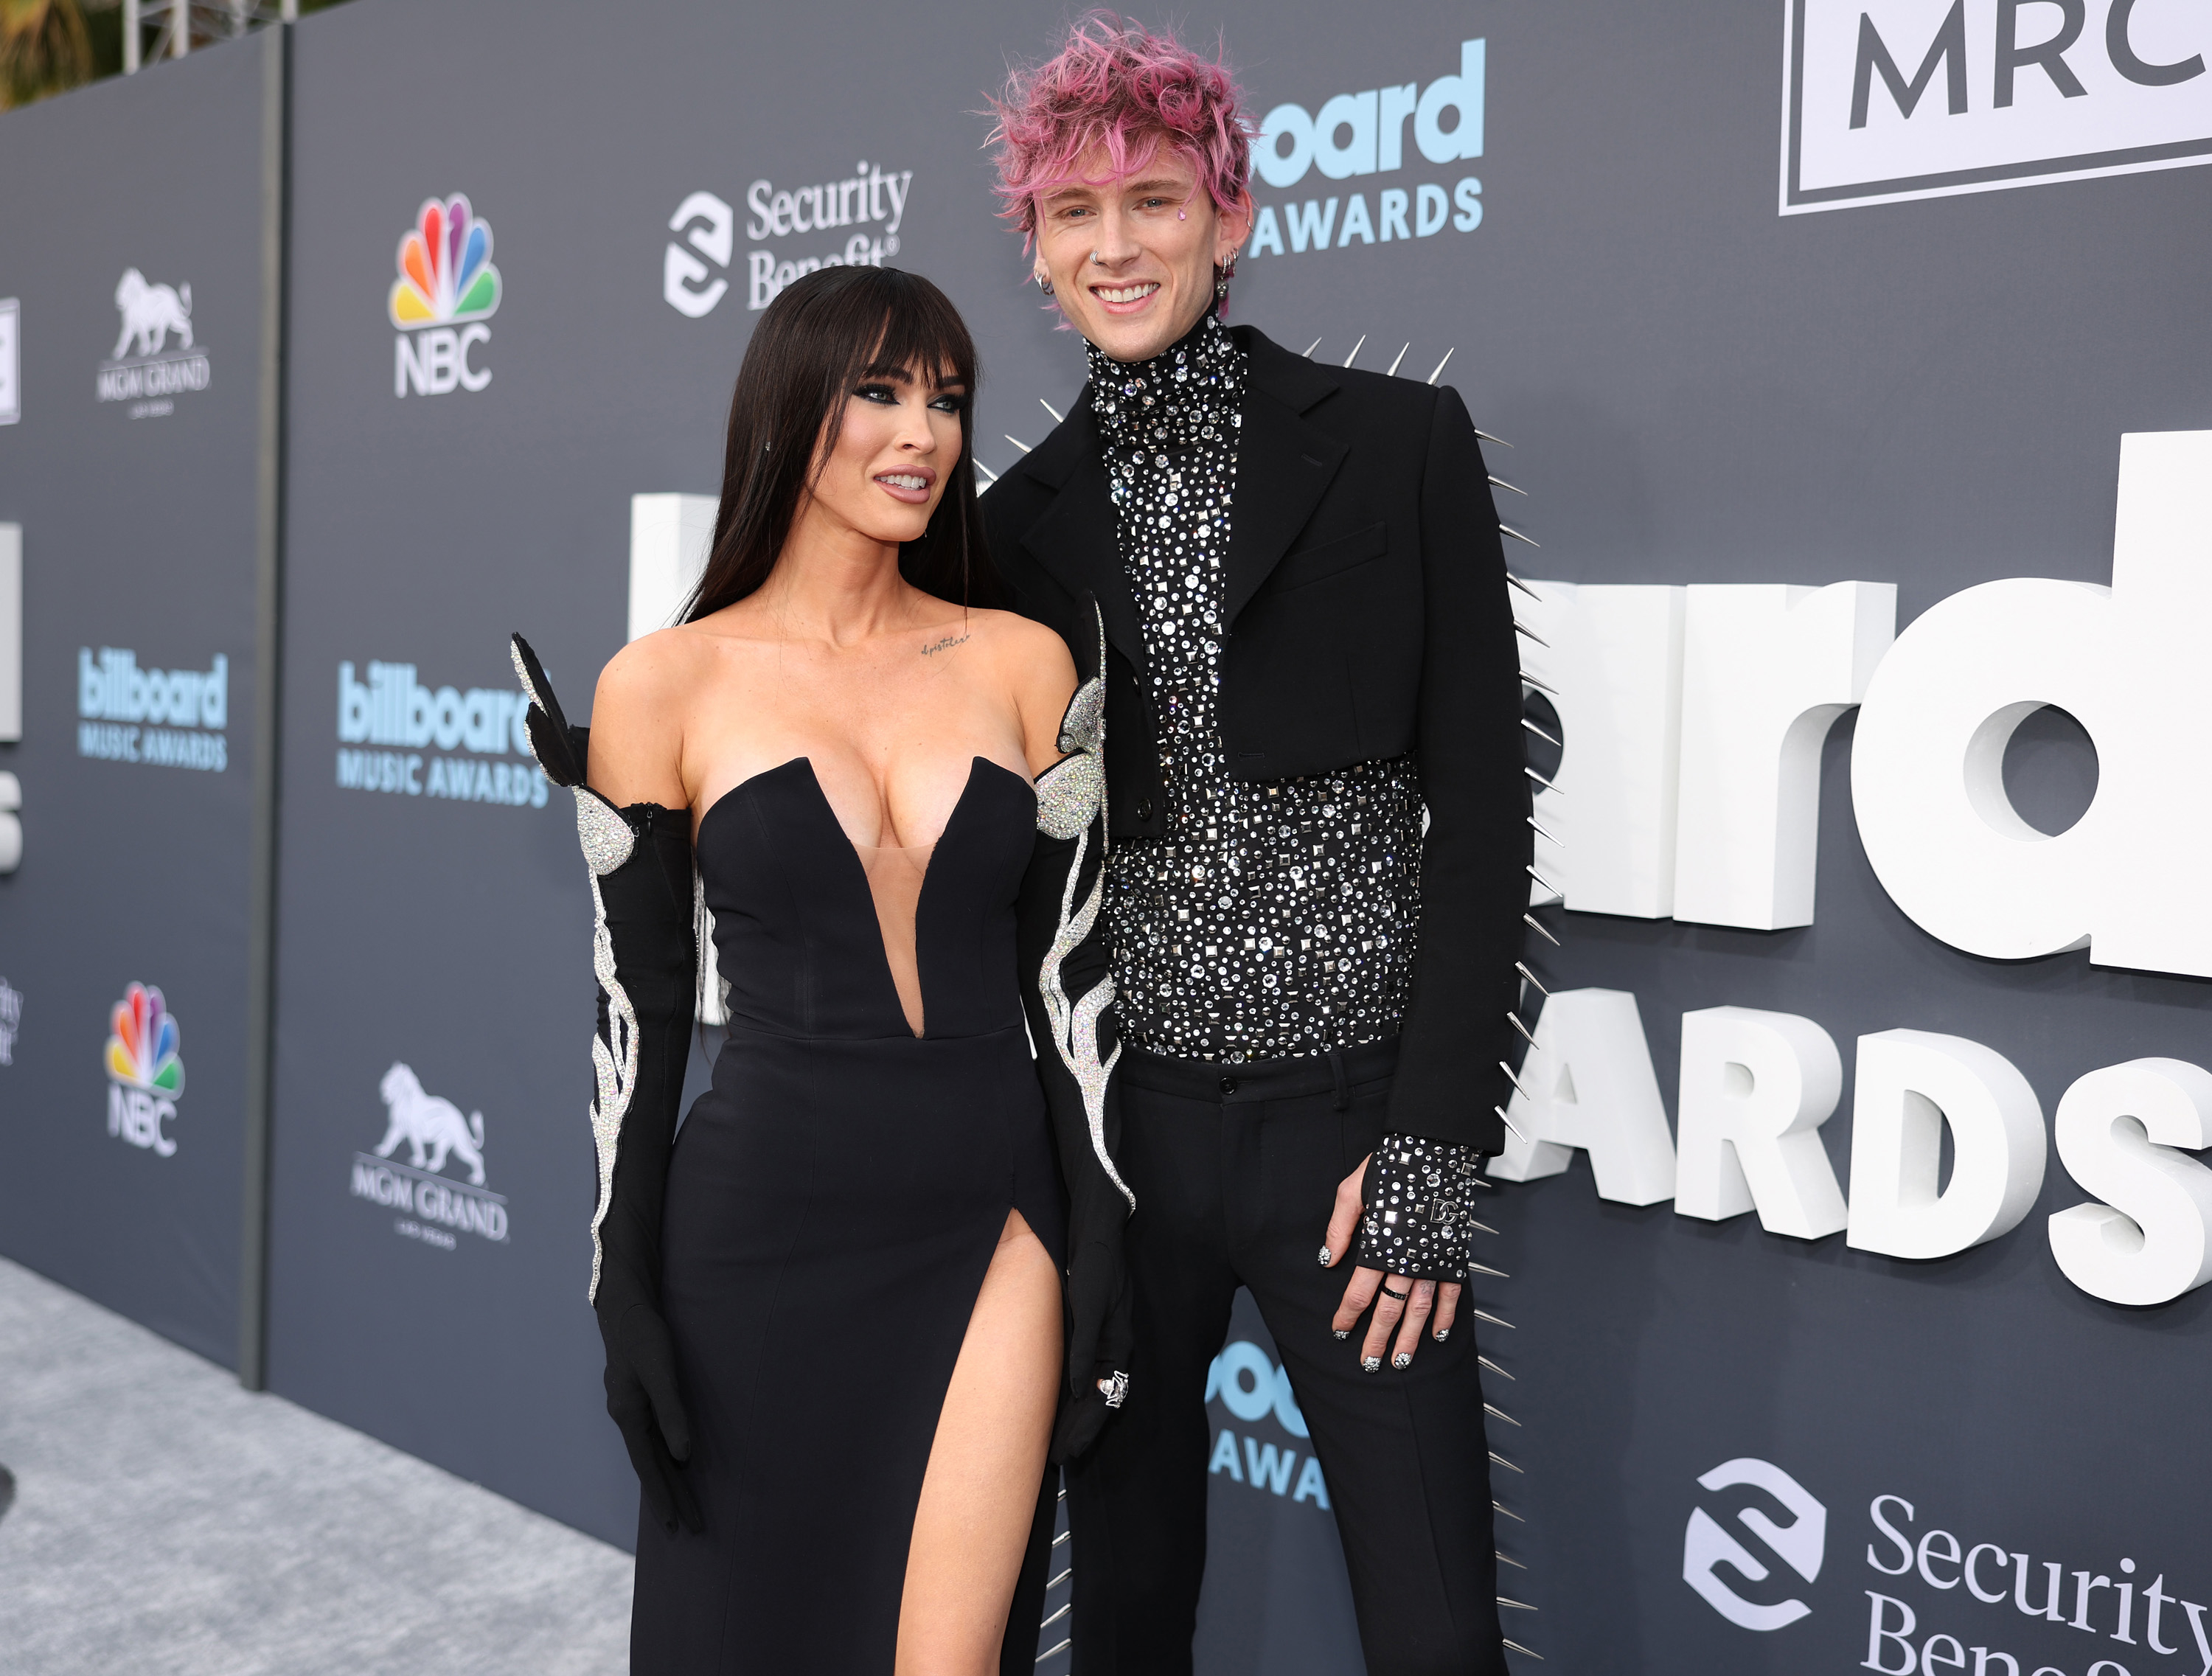 Megan Fox and Machine Gun Kelly pose on the red carpet at the Billboard Music Awards. Megan wears an off-shoulder dress with a high slit, and MGK wears a studded suit